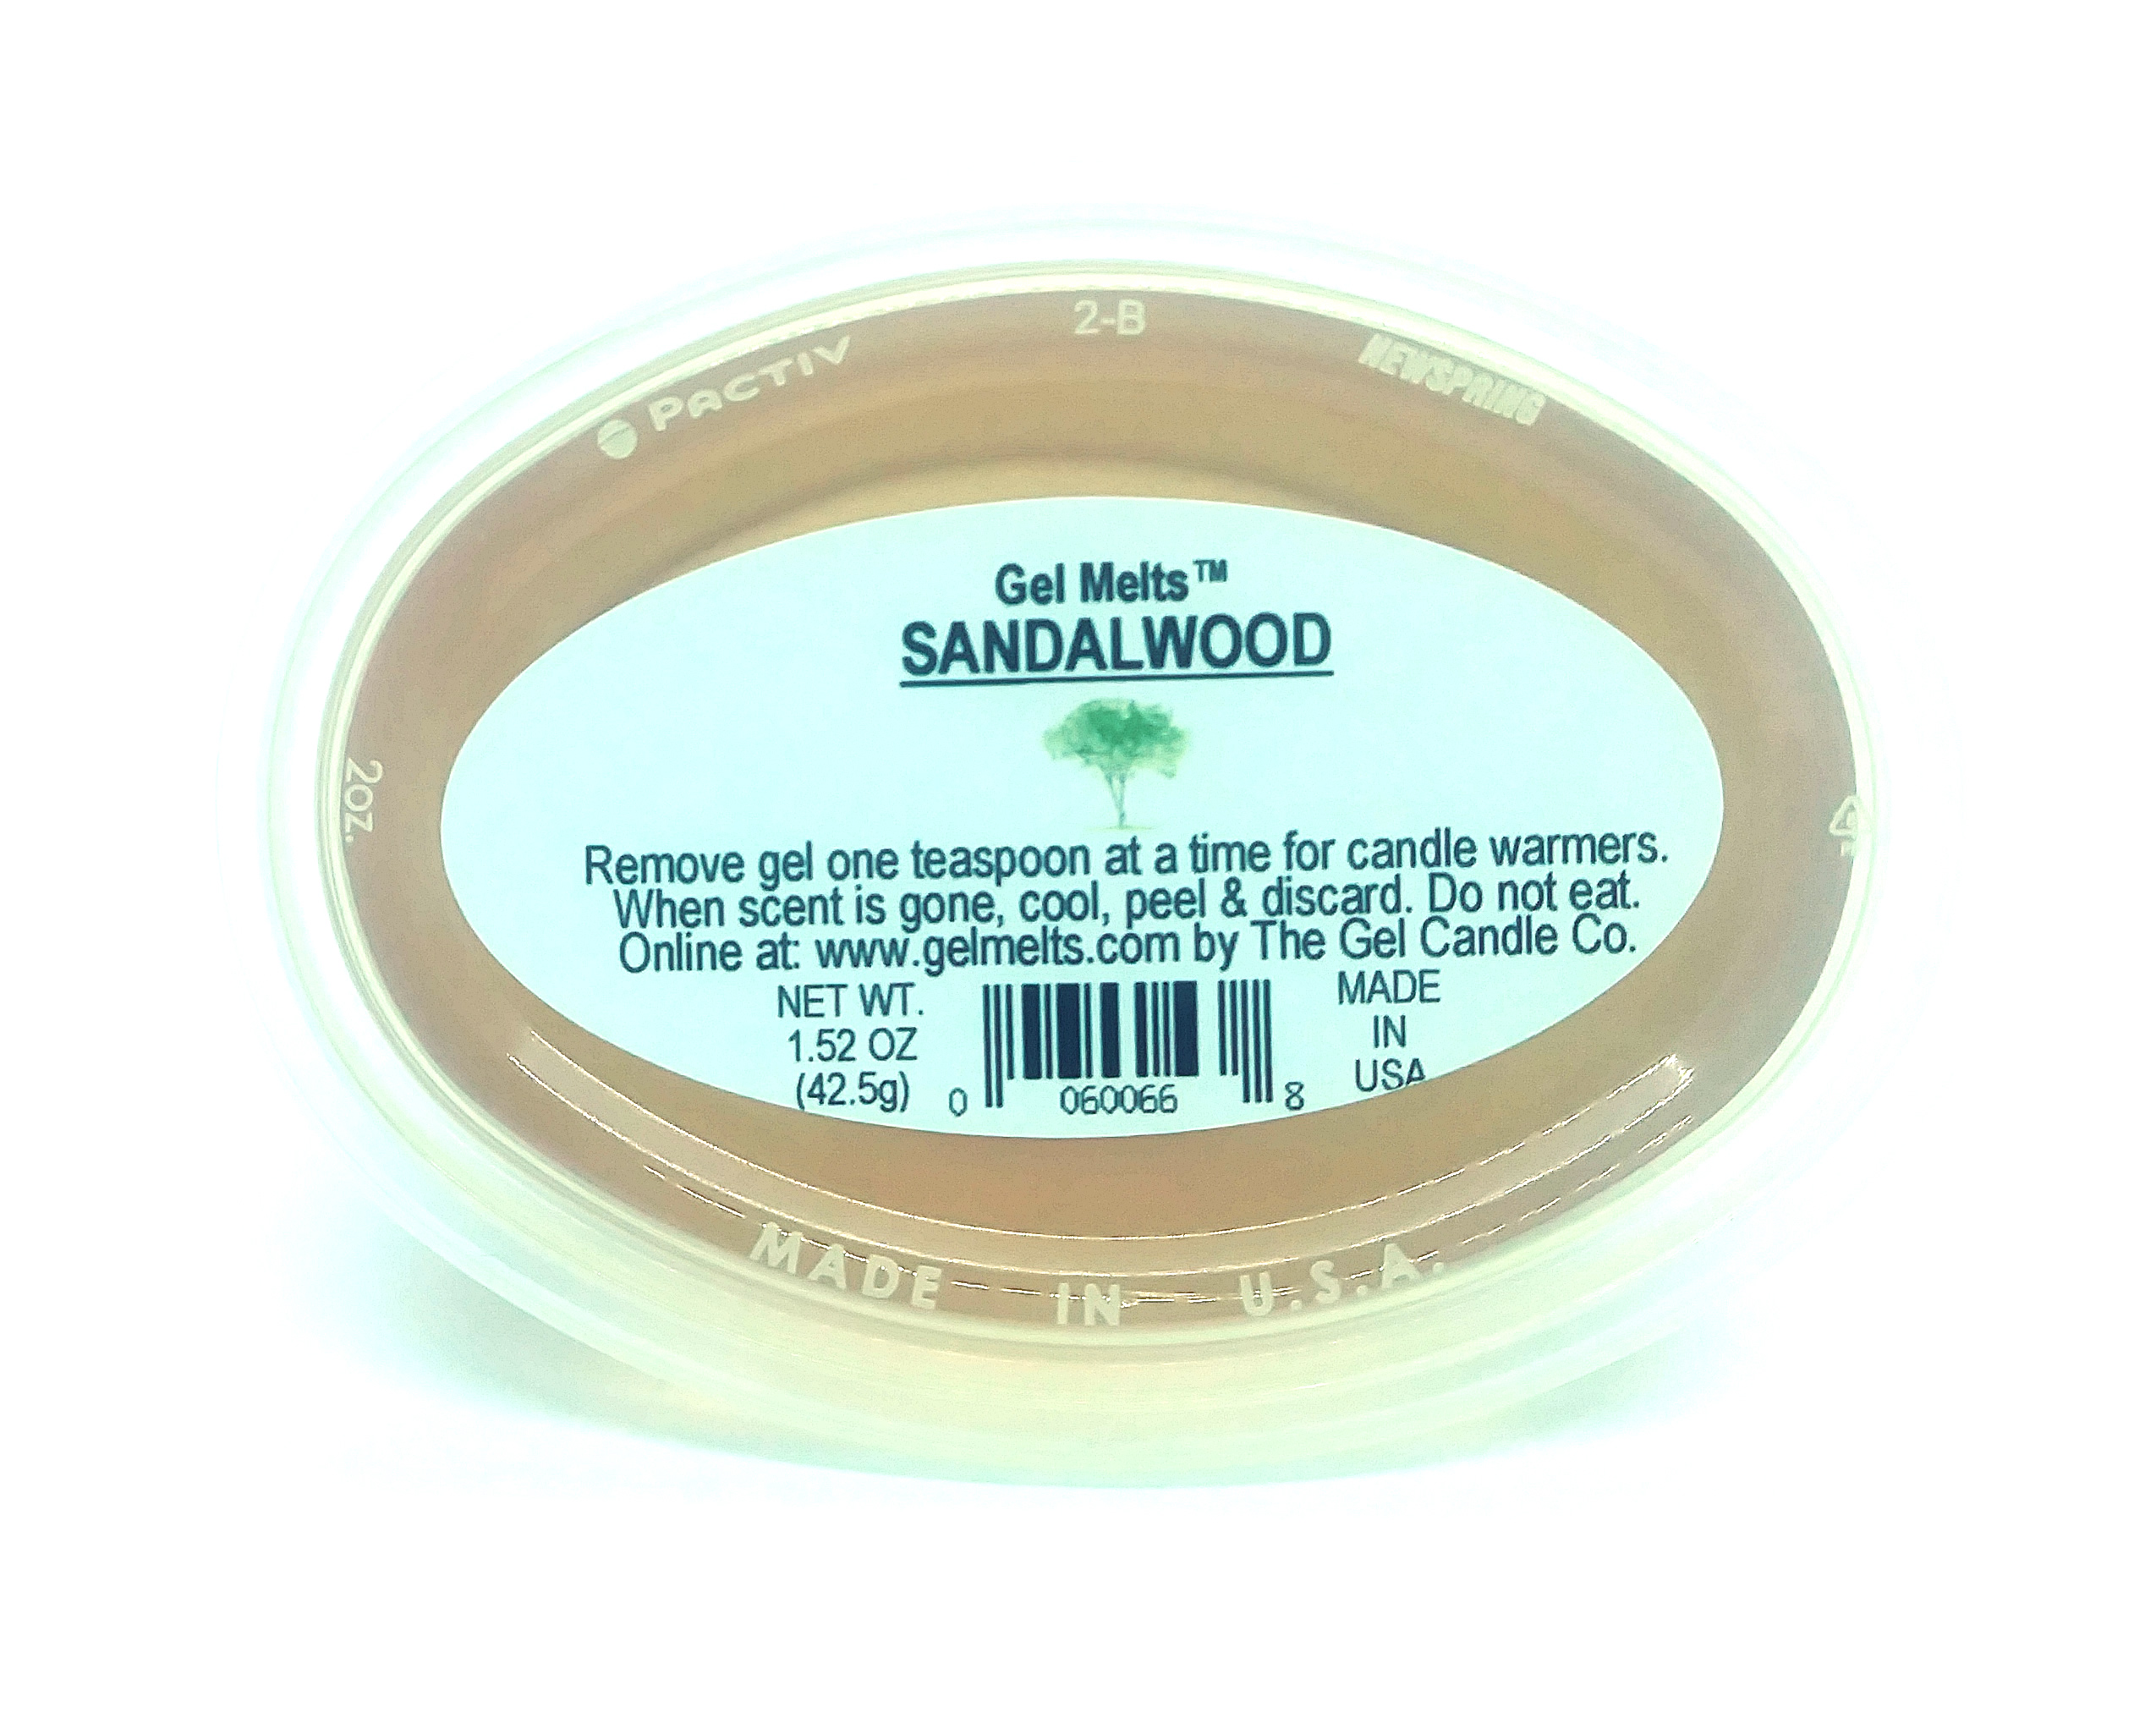 Sandalwood scented Gel Melts™ for warmers - 3 pack - Click Image to Close